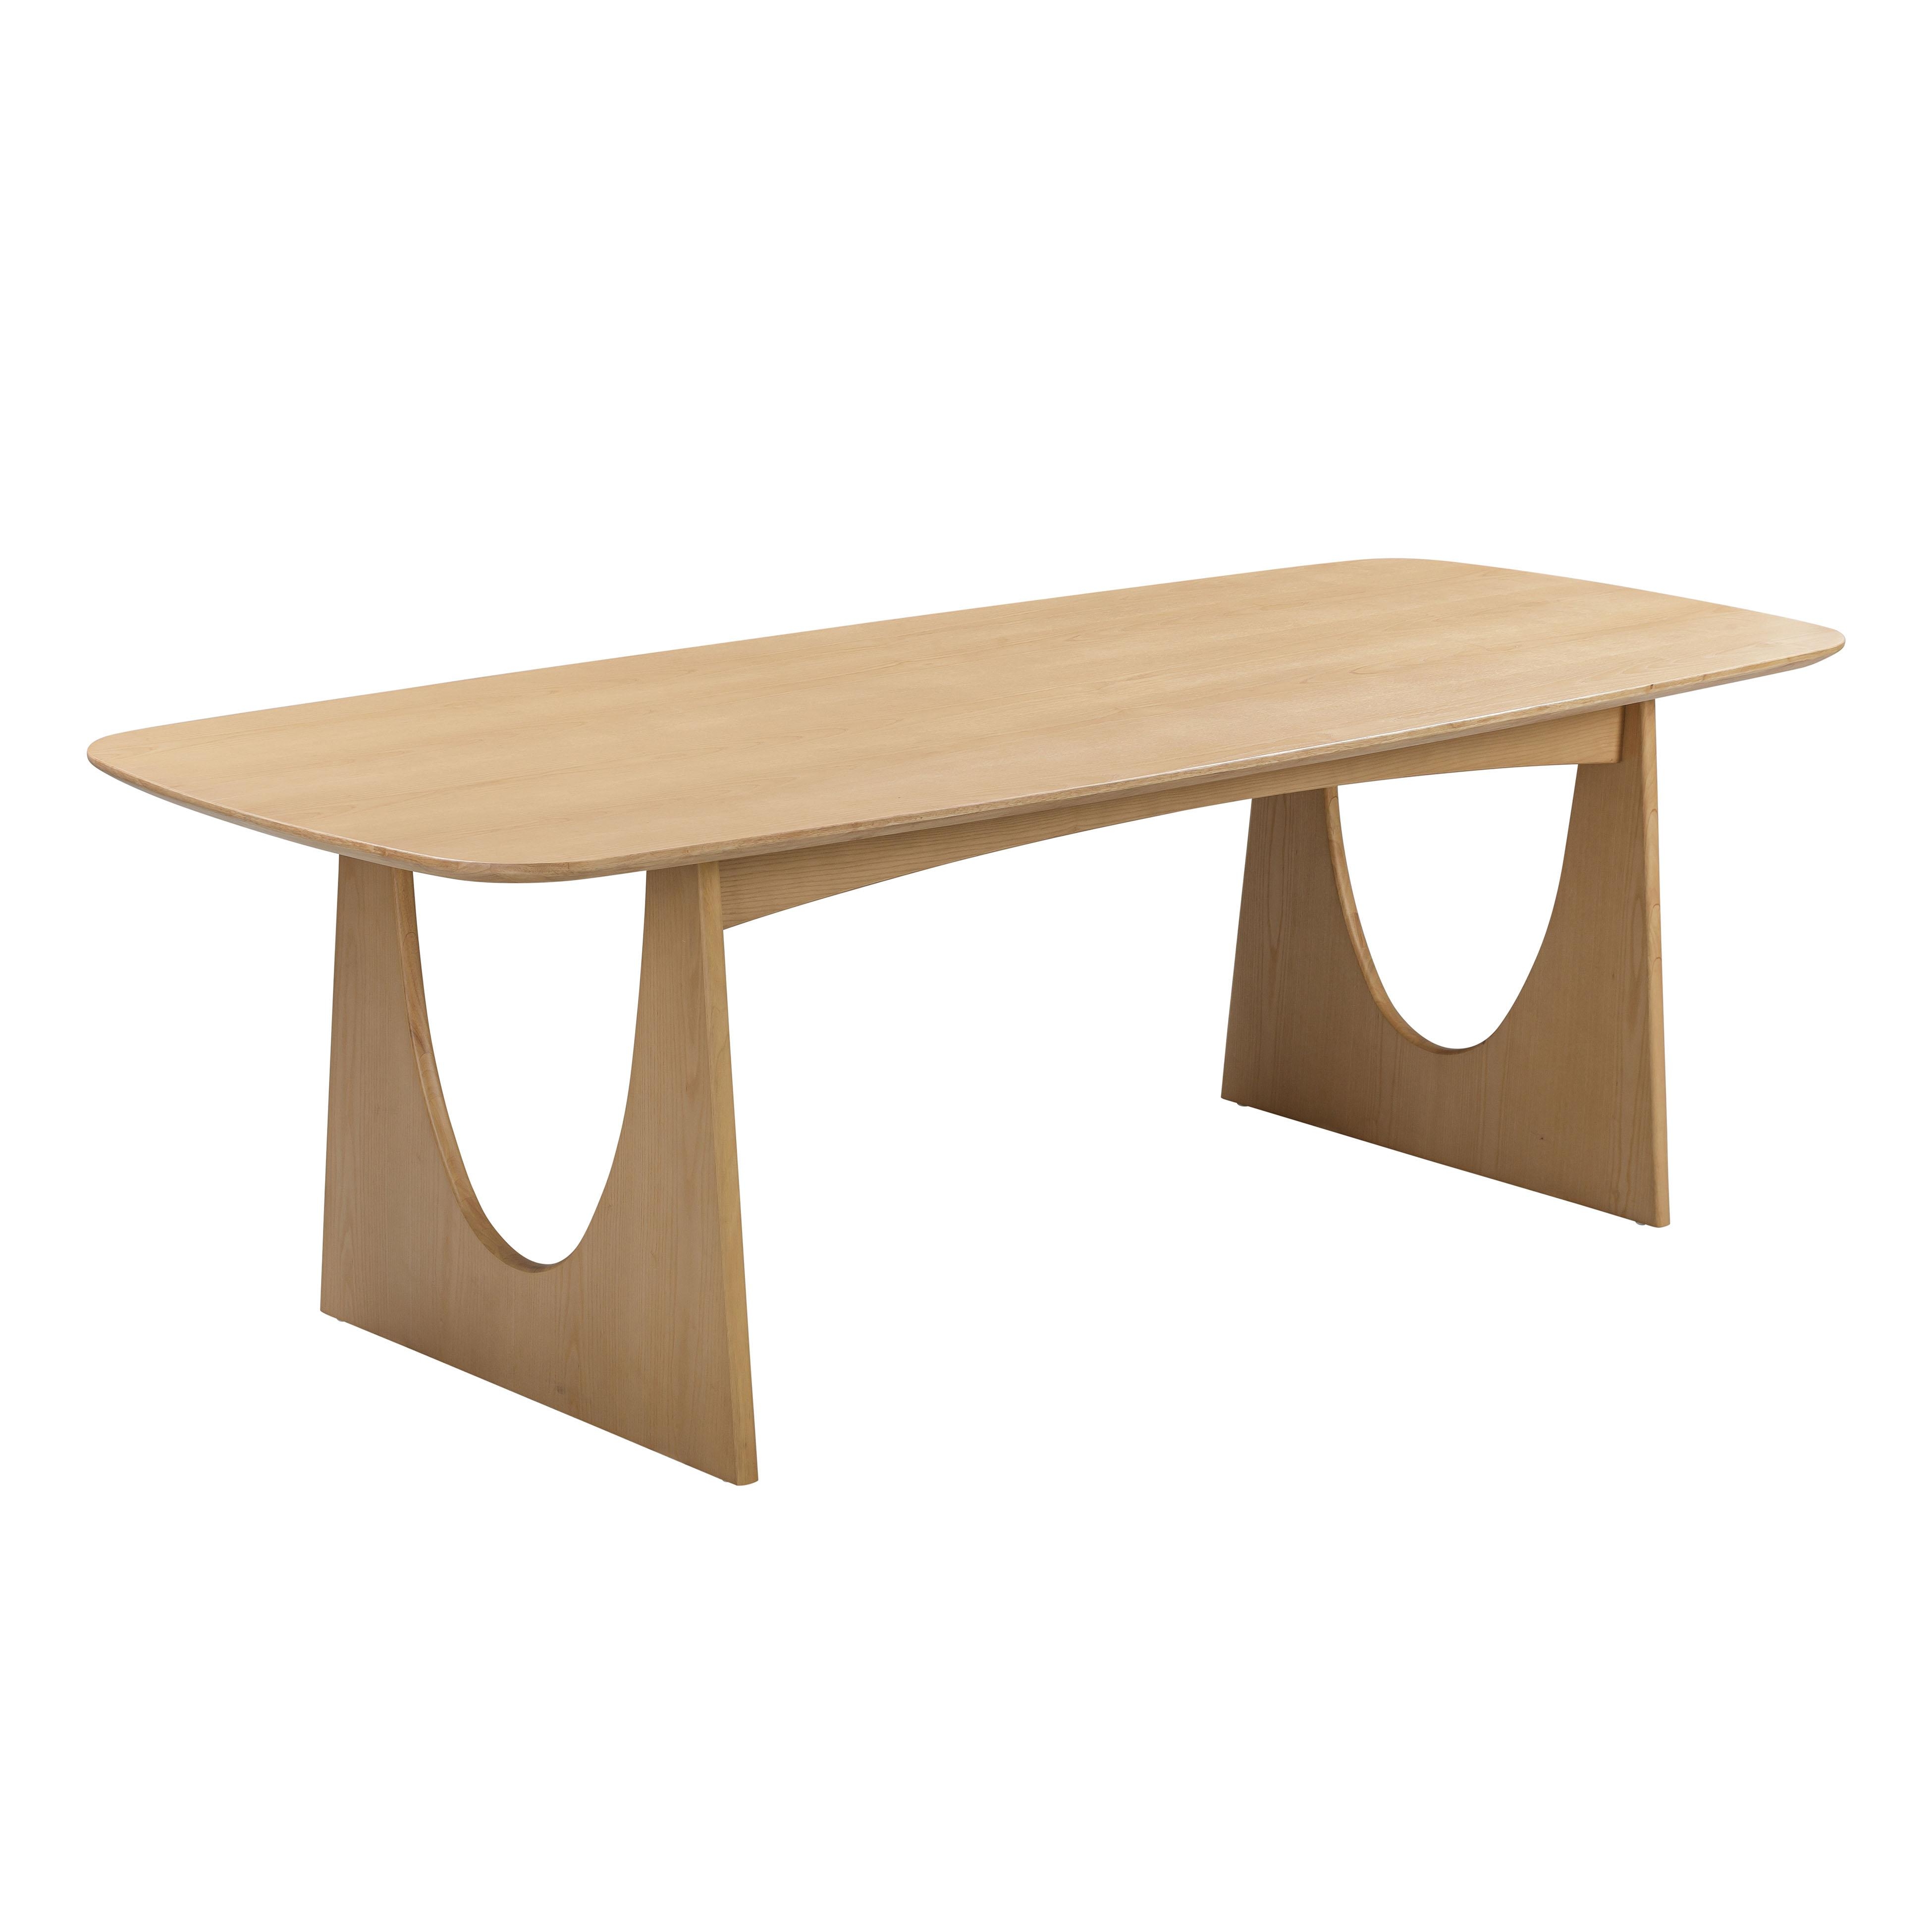 Cybill Natural Ash Dining Table - Image 1